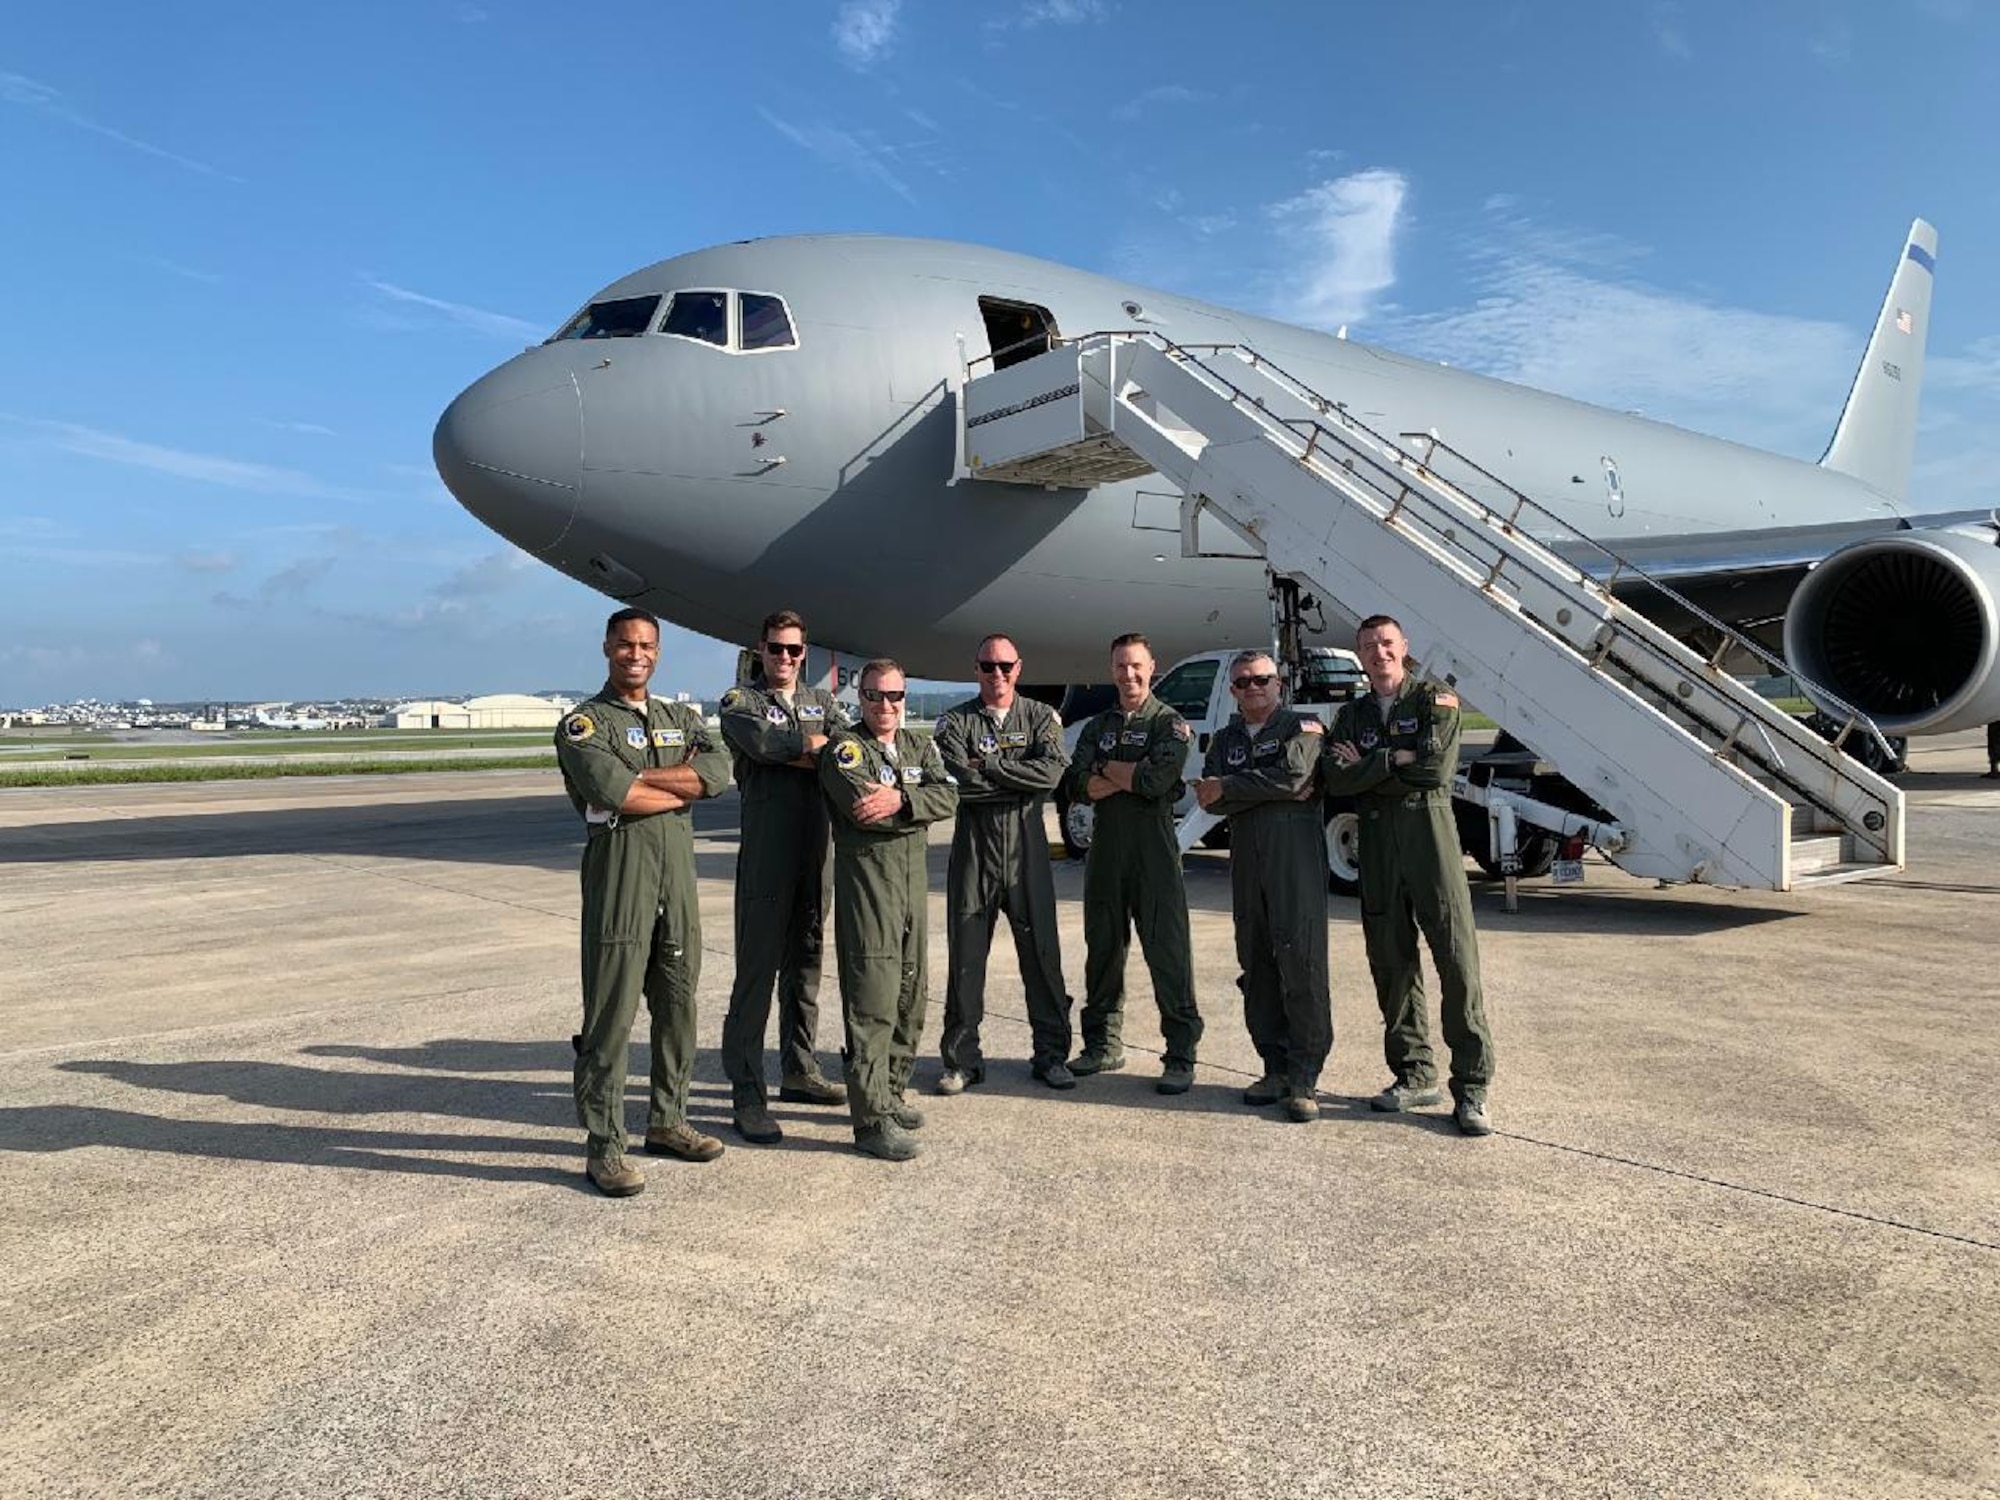 From left, Capt. Erik Earle, Capt. Chris Schimmel, Maj. Matt Valentino, Master Sgt. Brett Peterson, Capt. Jordan Gauvin, Chief Master Sgt. Michael George and Maj. Leon Rice pose in front of a KC-46A Pegasus, Sept. 8, 2020, at Kadena Air Base, Japan. The Pease airmen executed the first official transoceanic coronet ever accomplished with a Pegaus refueler, which began Sept. 9 and involved 16 aerial refuelings of five F/A-18 jets. (courtesy photo)